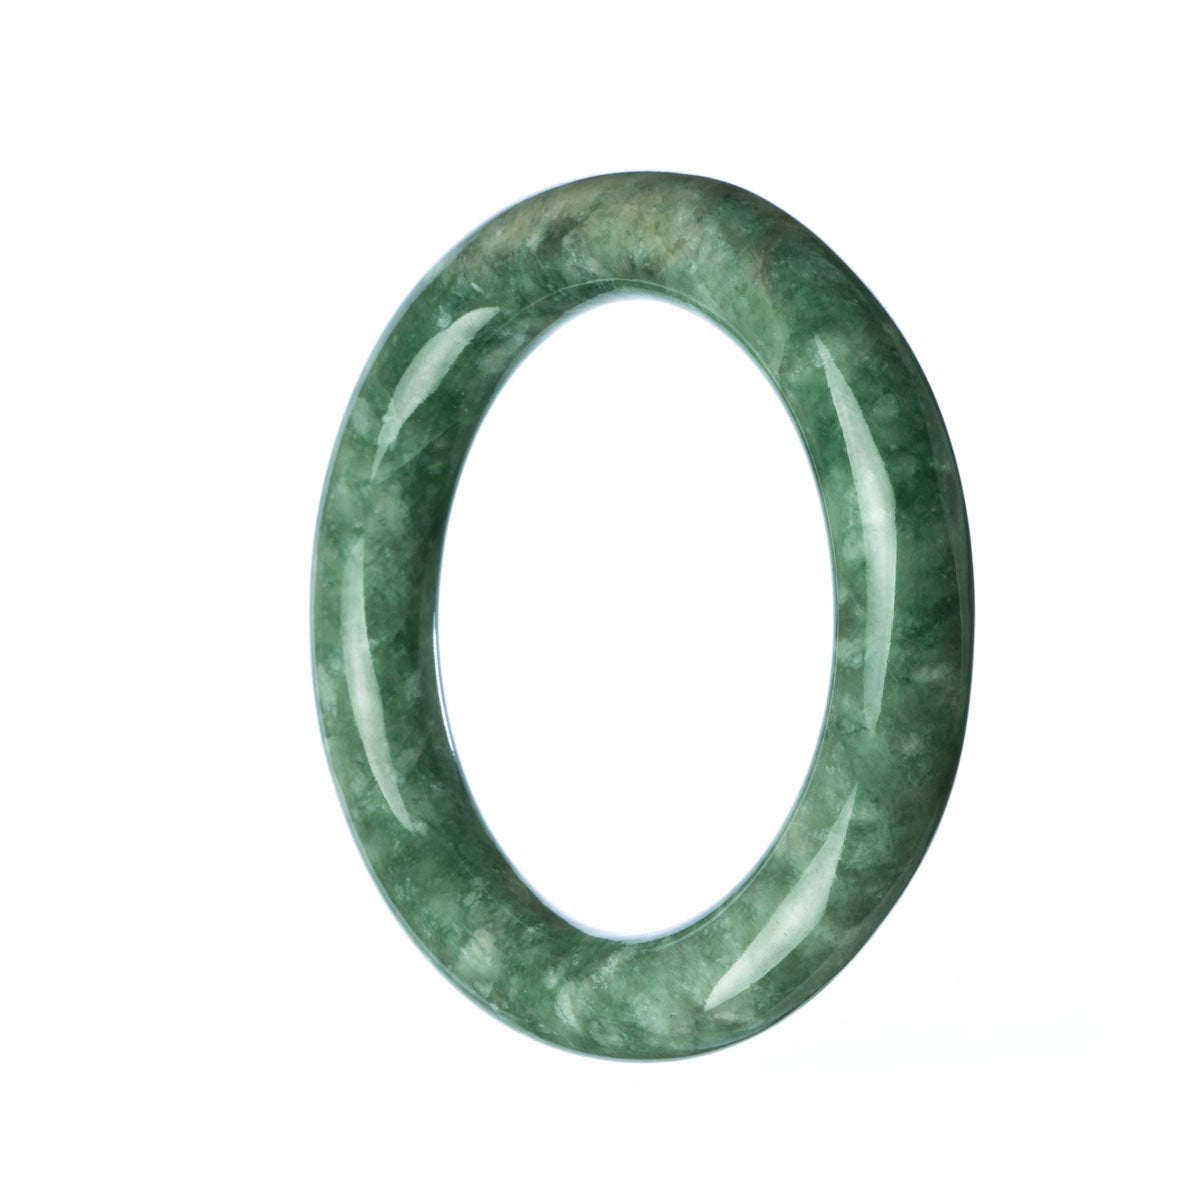 A round, 52mm green jadeite jade bangle bracelet with a vibrant Type A color. Perfect for adding a touch of elegance to any outfit.